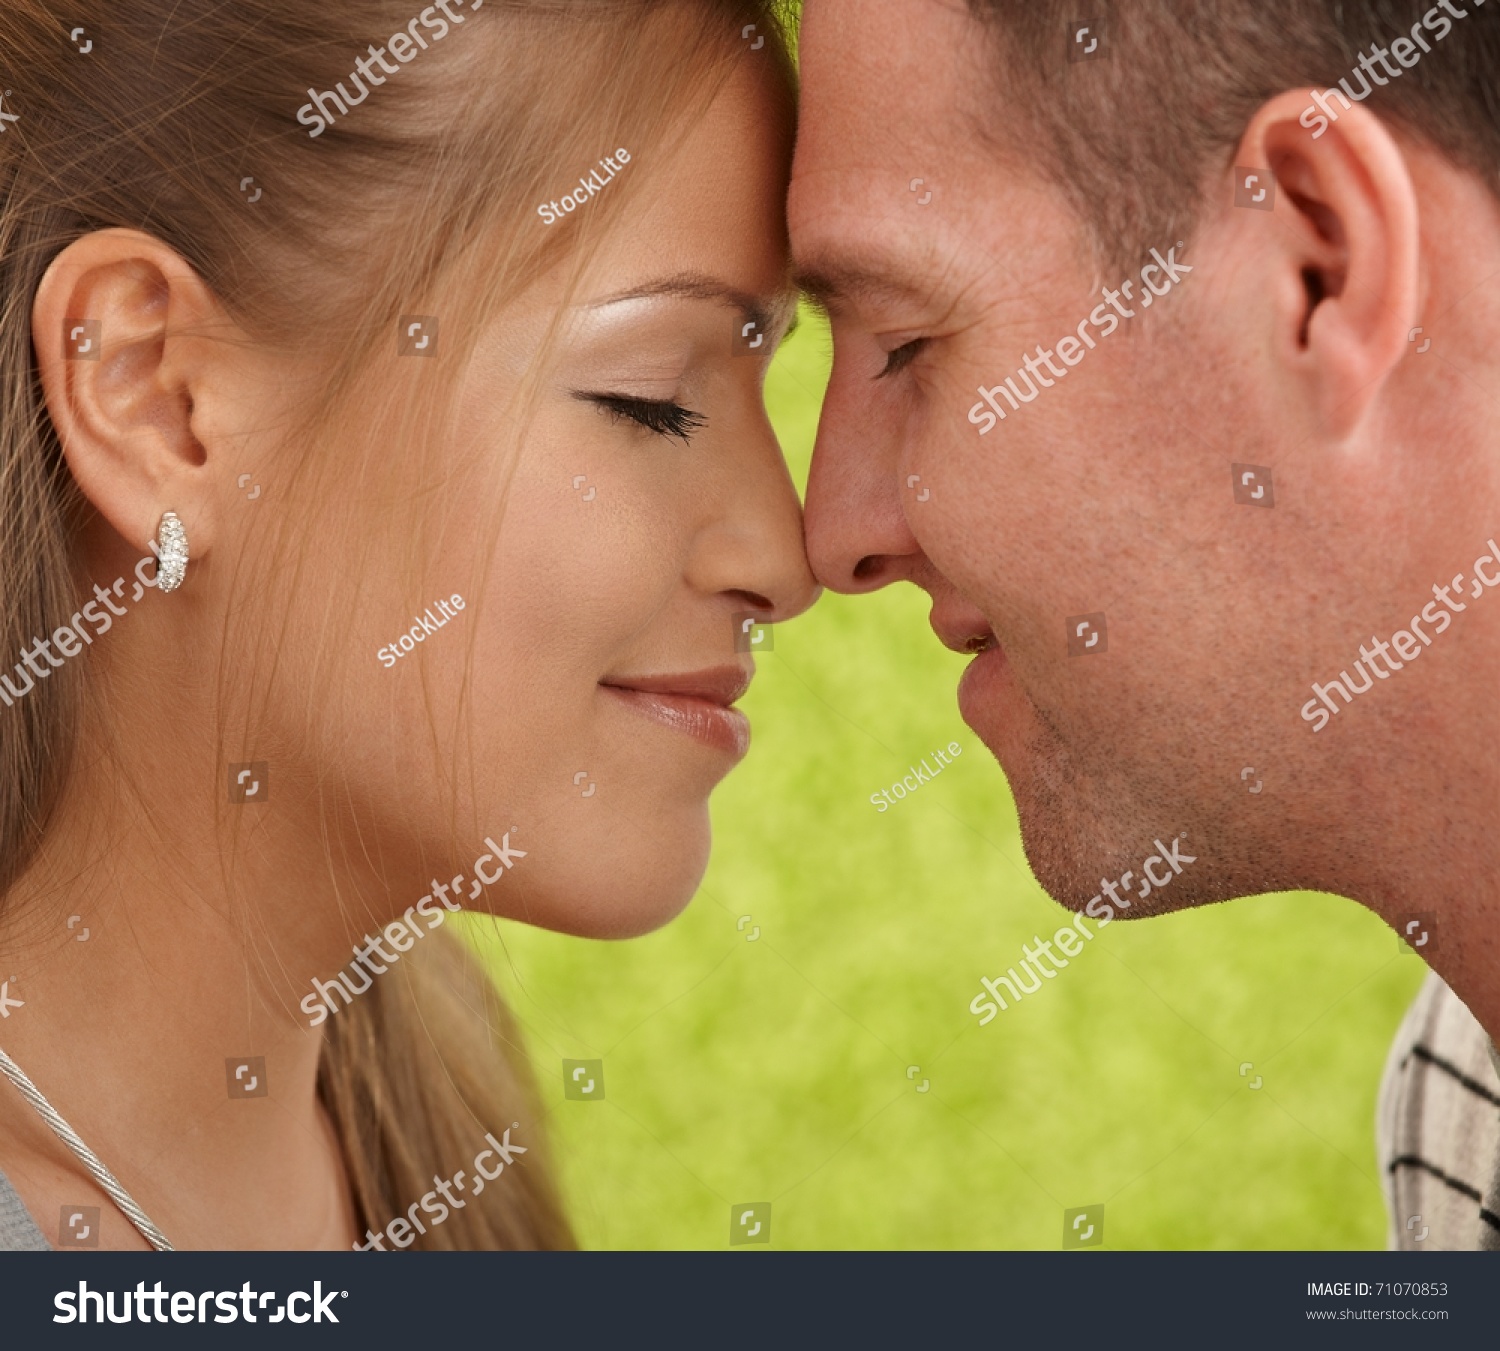 Loving Couple'S Faces In Closeup, Foreheads Touched, Facing Each Other ...